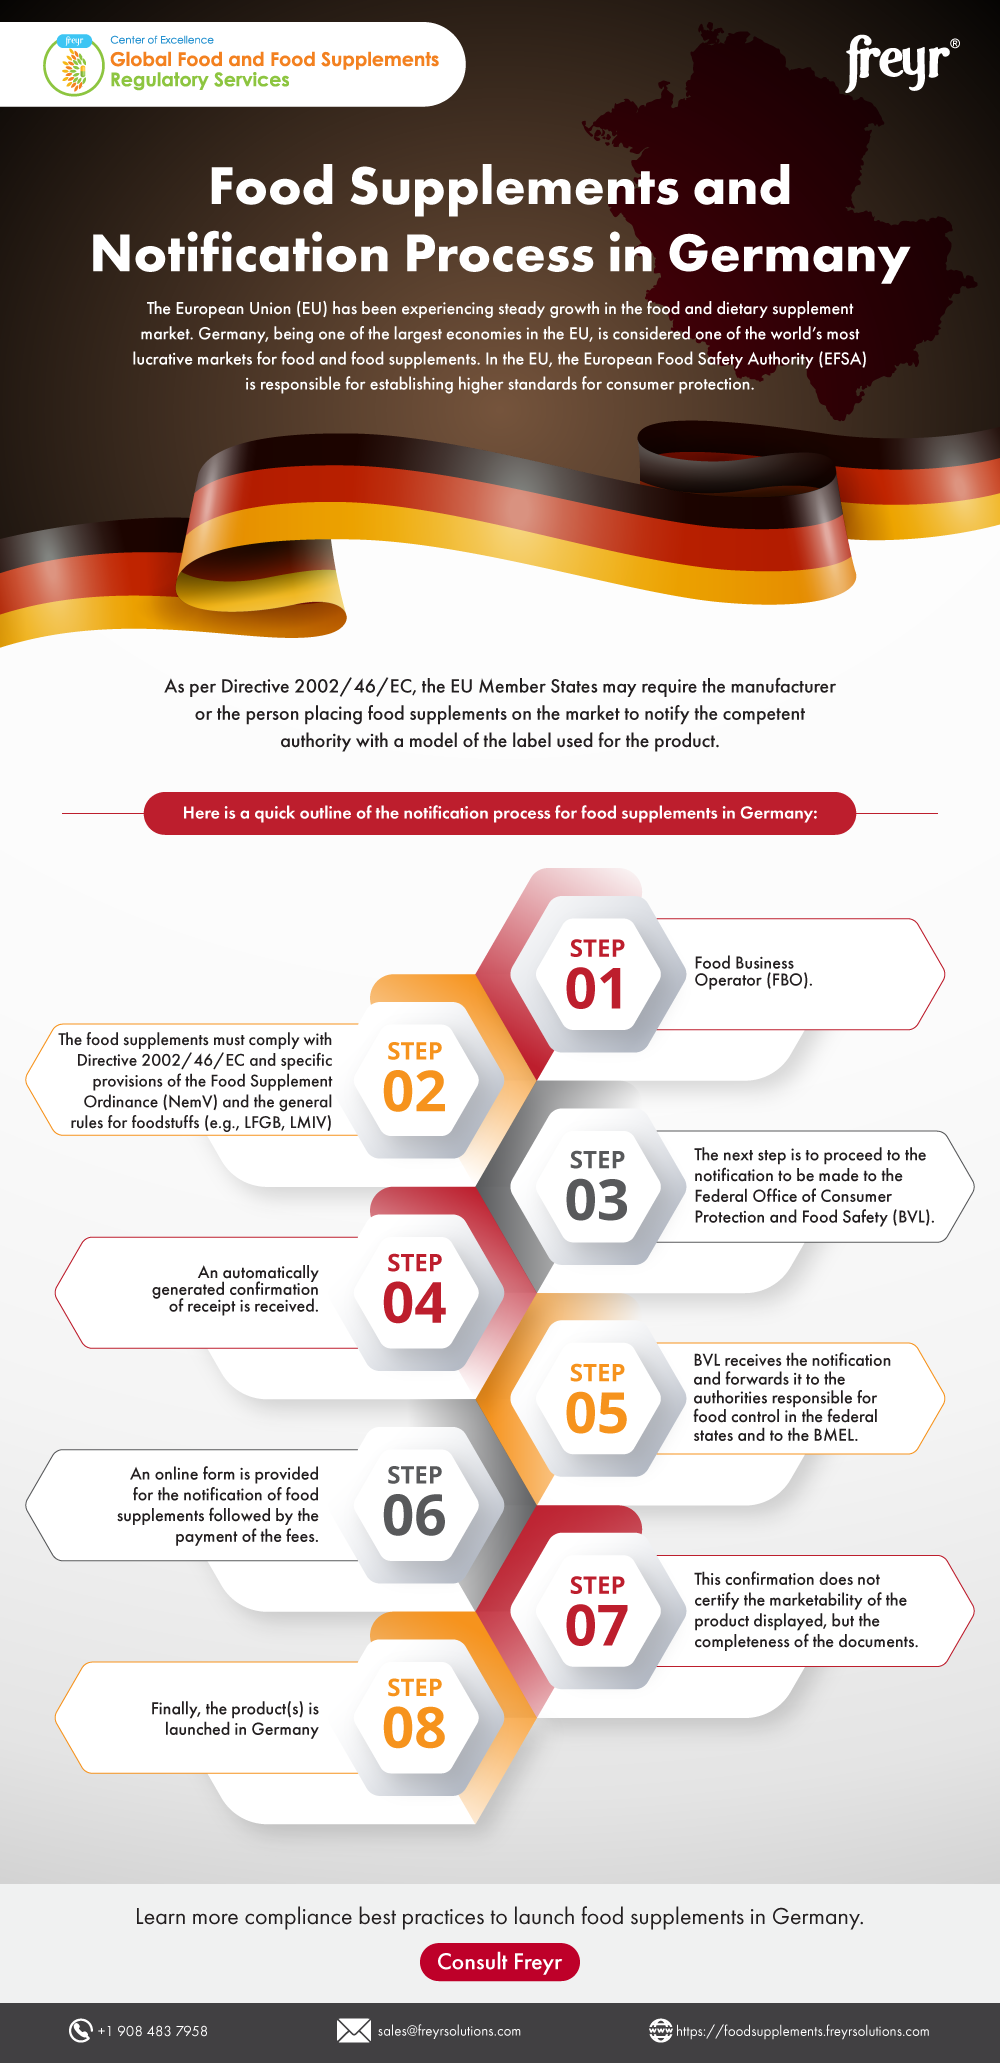 Food Supplements and Notification Process in Germany